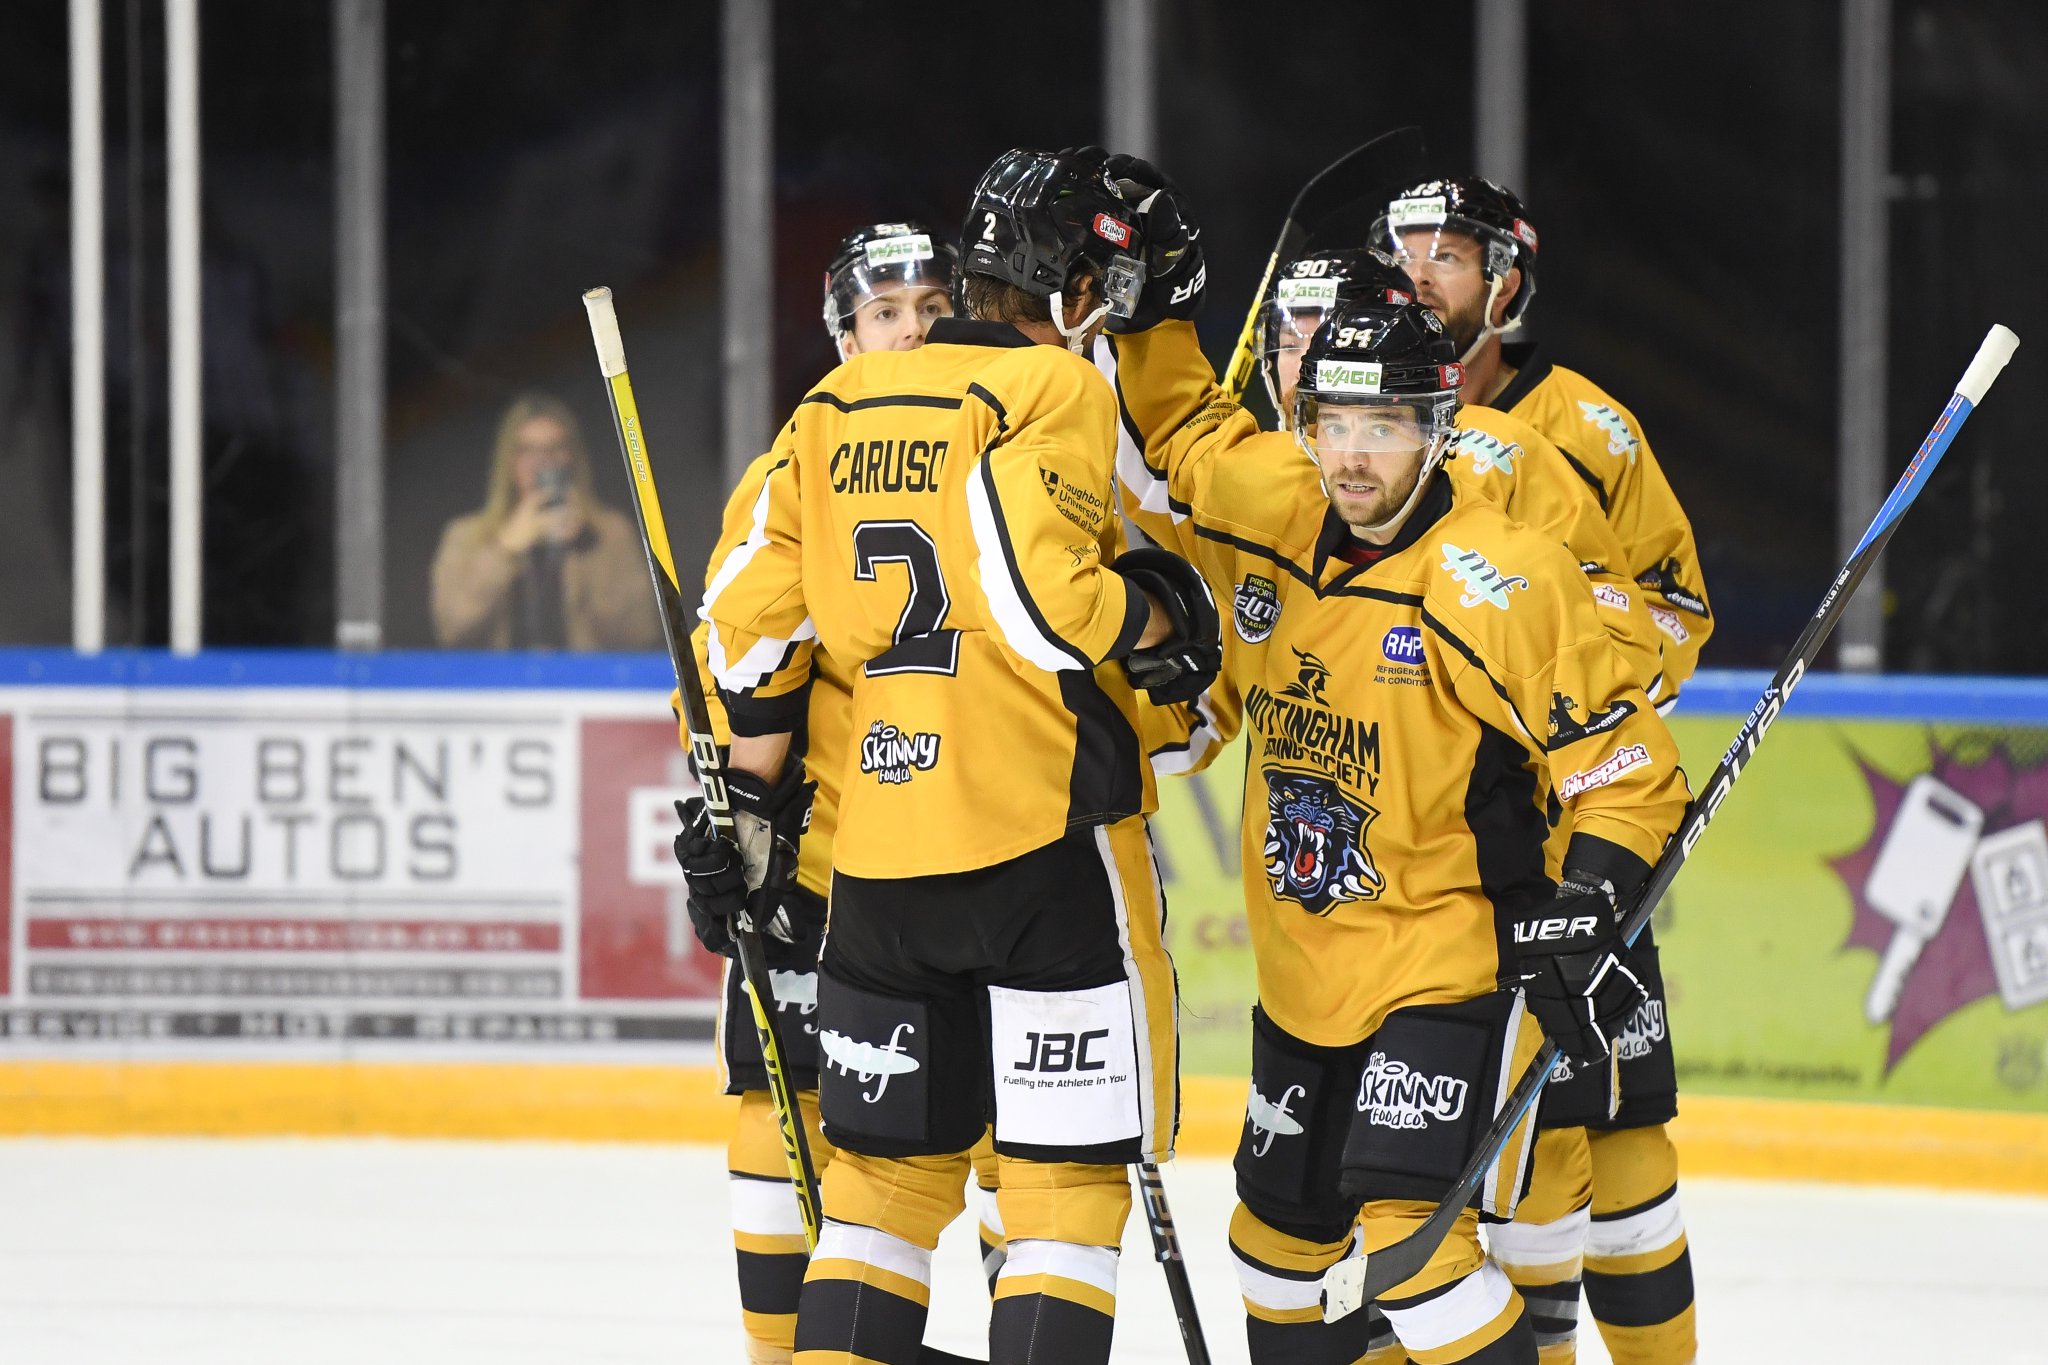 PANTHERS HOST GIANTS IN THE ELITE LEAGUE Top Image